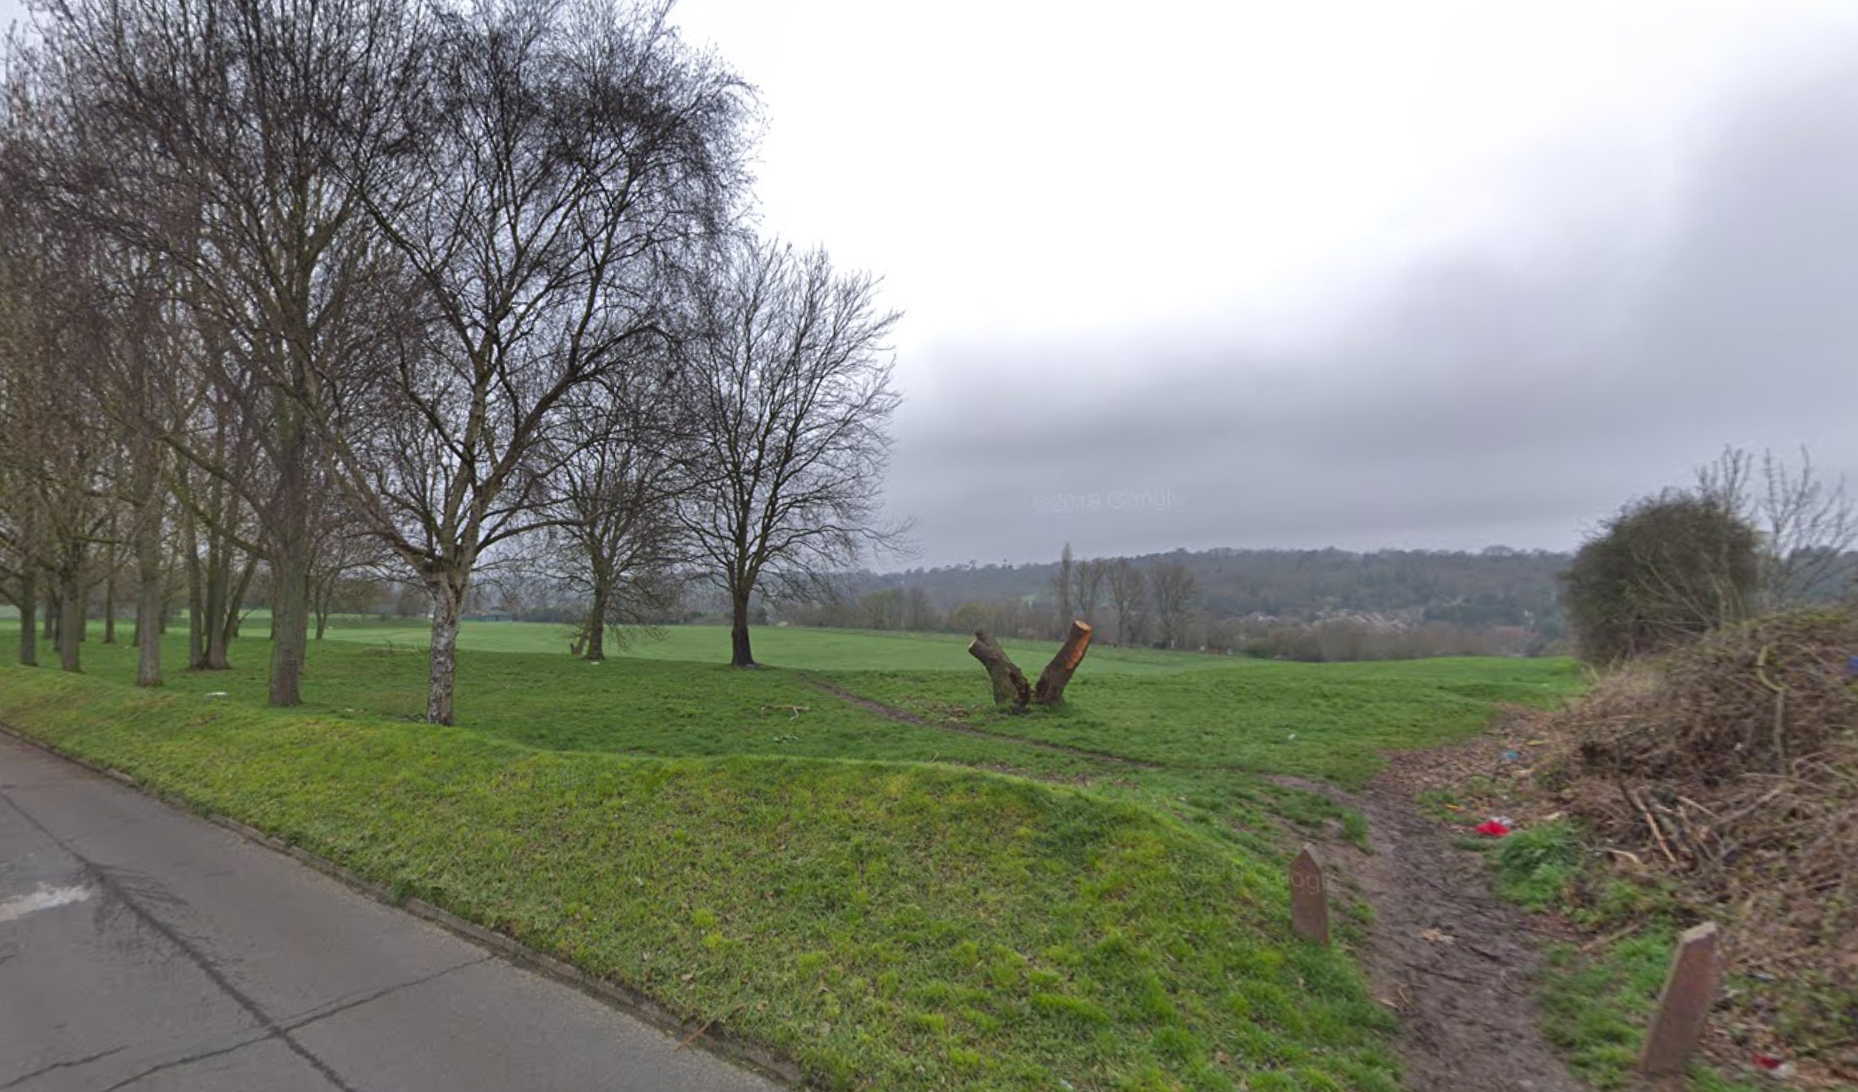 Possible human remains were discovered at Rowdown Field, Croydon